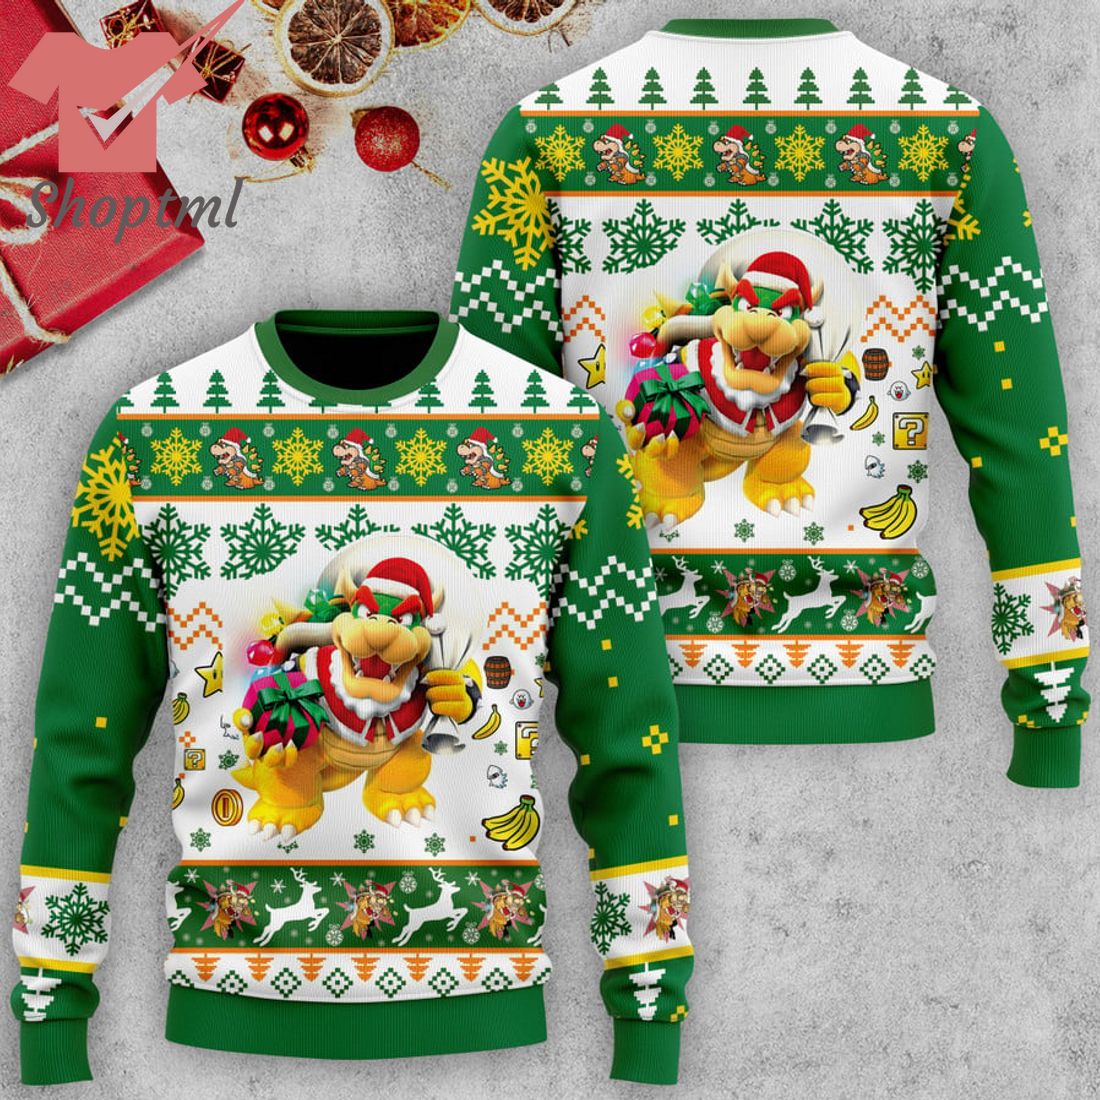 Bower Super Mario Ugly Christmas Sweater